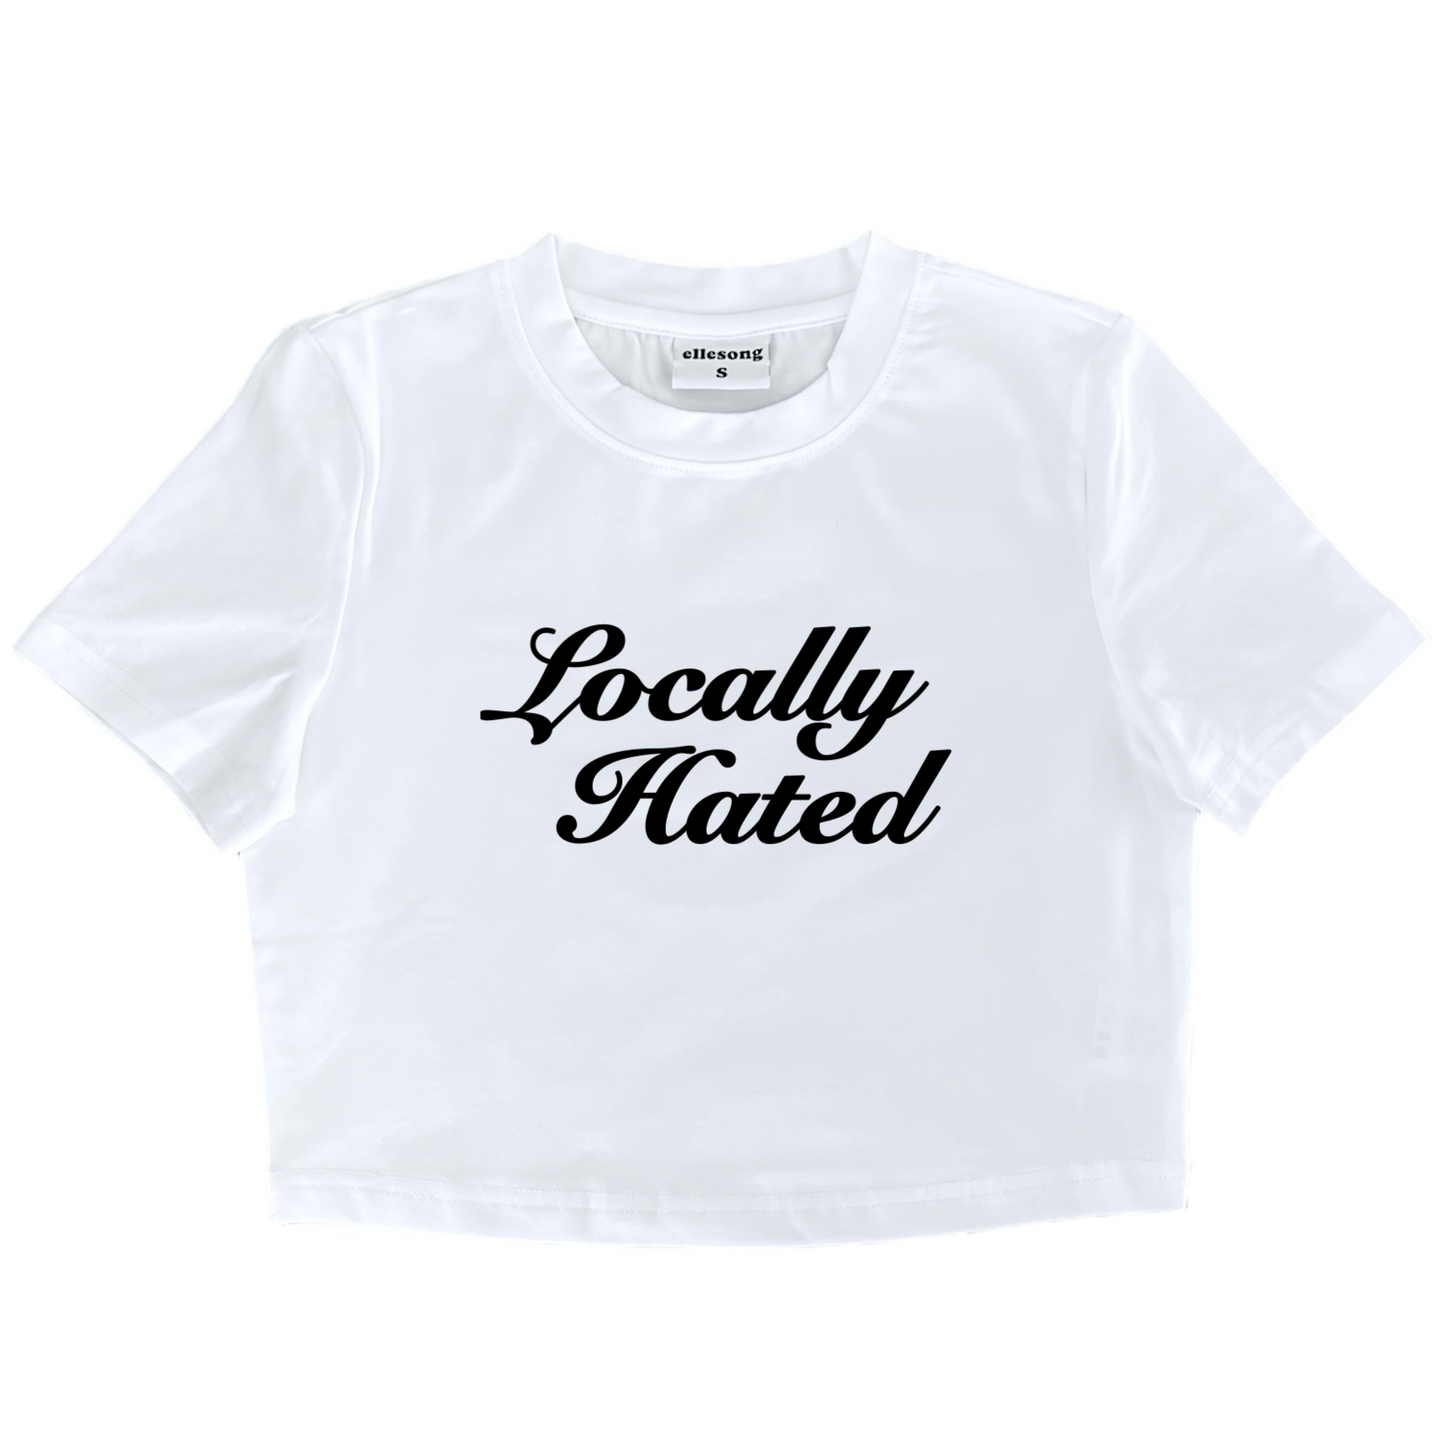 Locally Hated Baby Tee